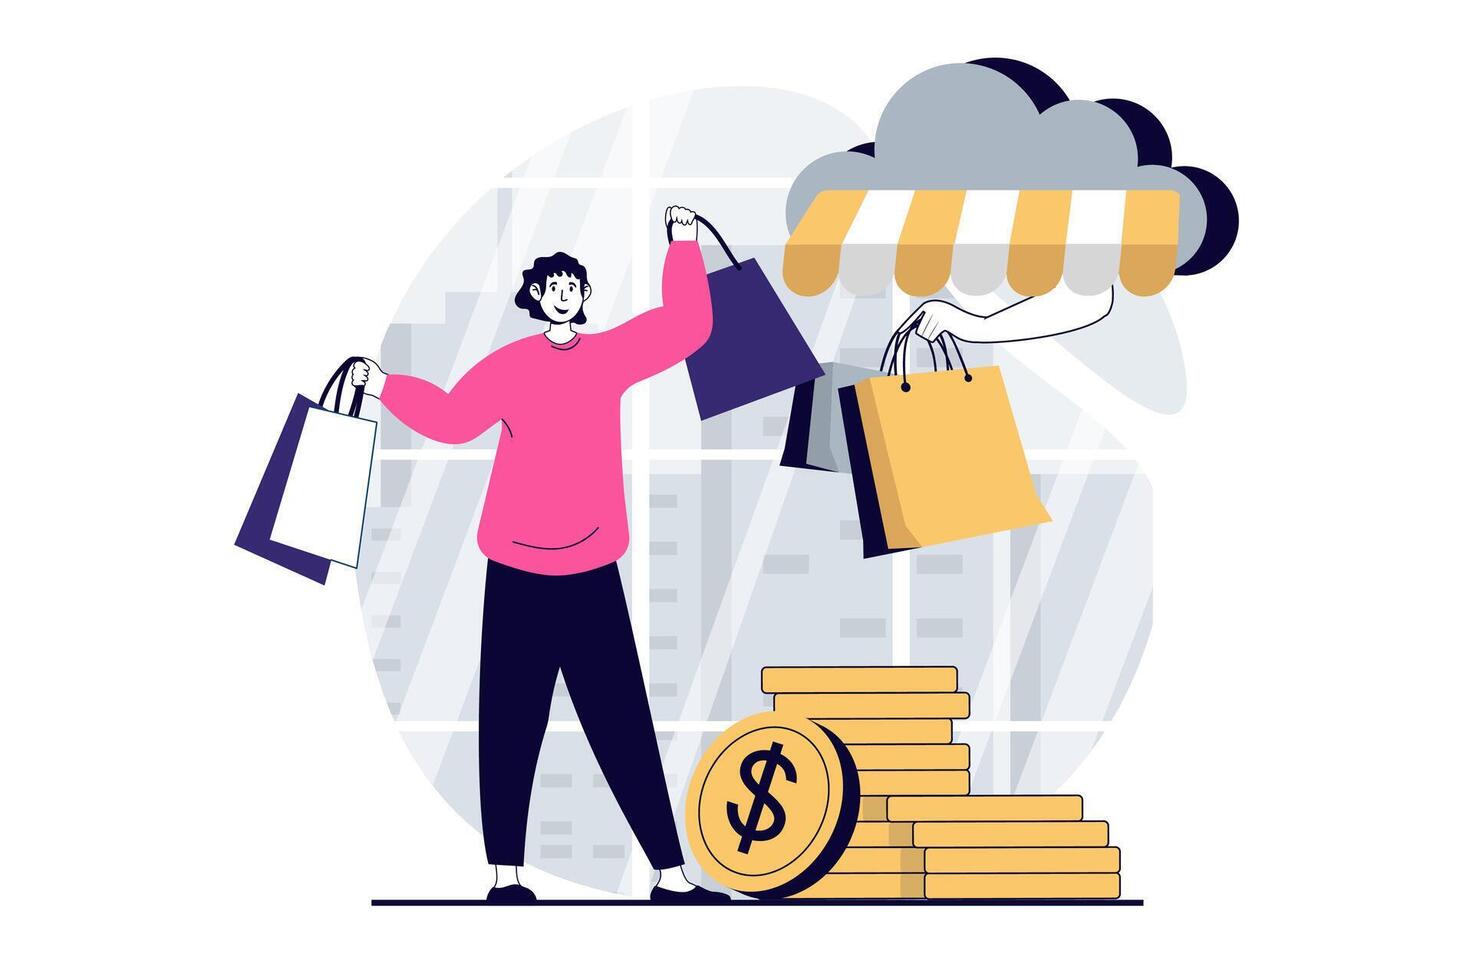 Mobile commerce concept with people scene in flat design for web. Woman with shopping bags making online orders and buying goods. Vector illustration for social media banner, marketing material.